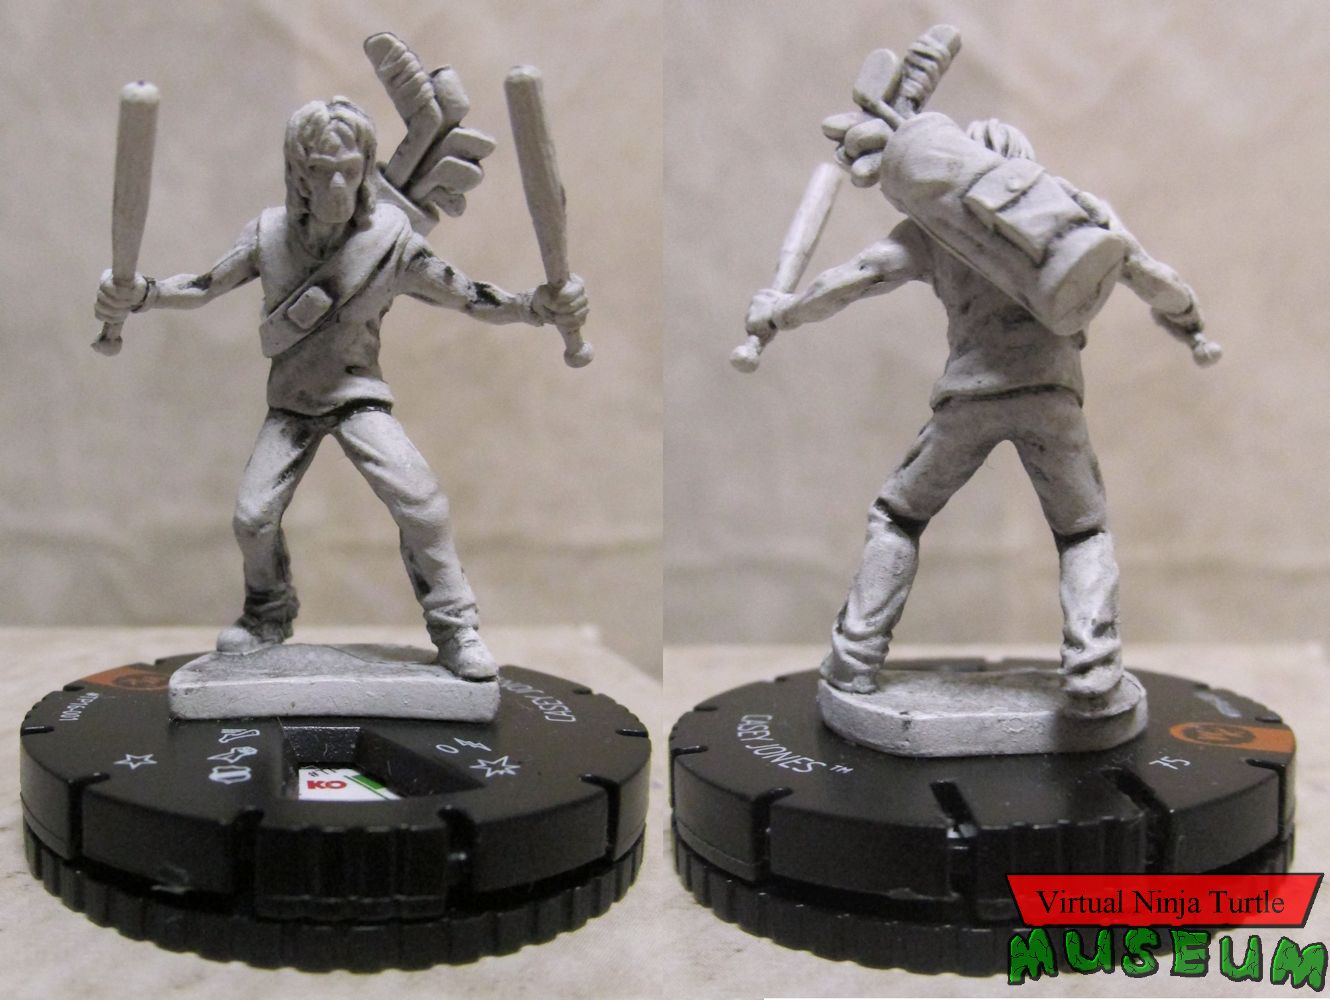 B&W Casey Jones front and back